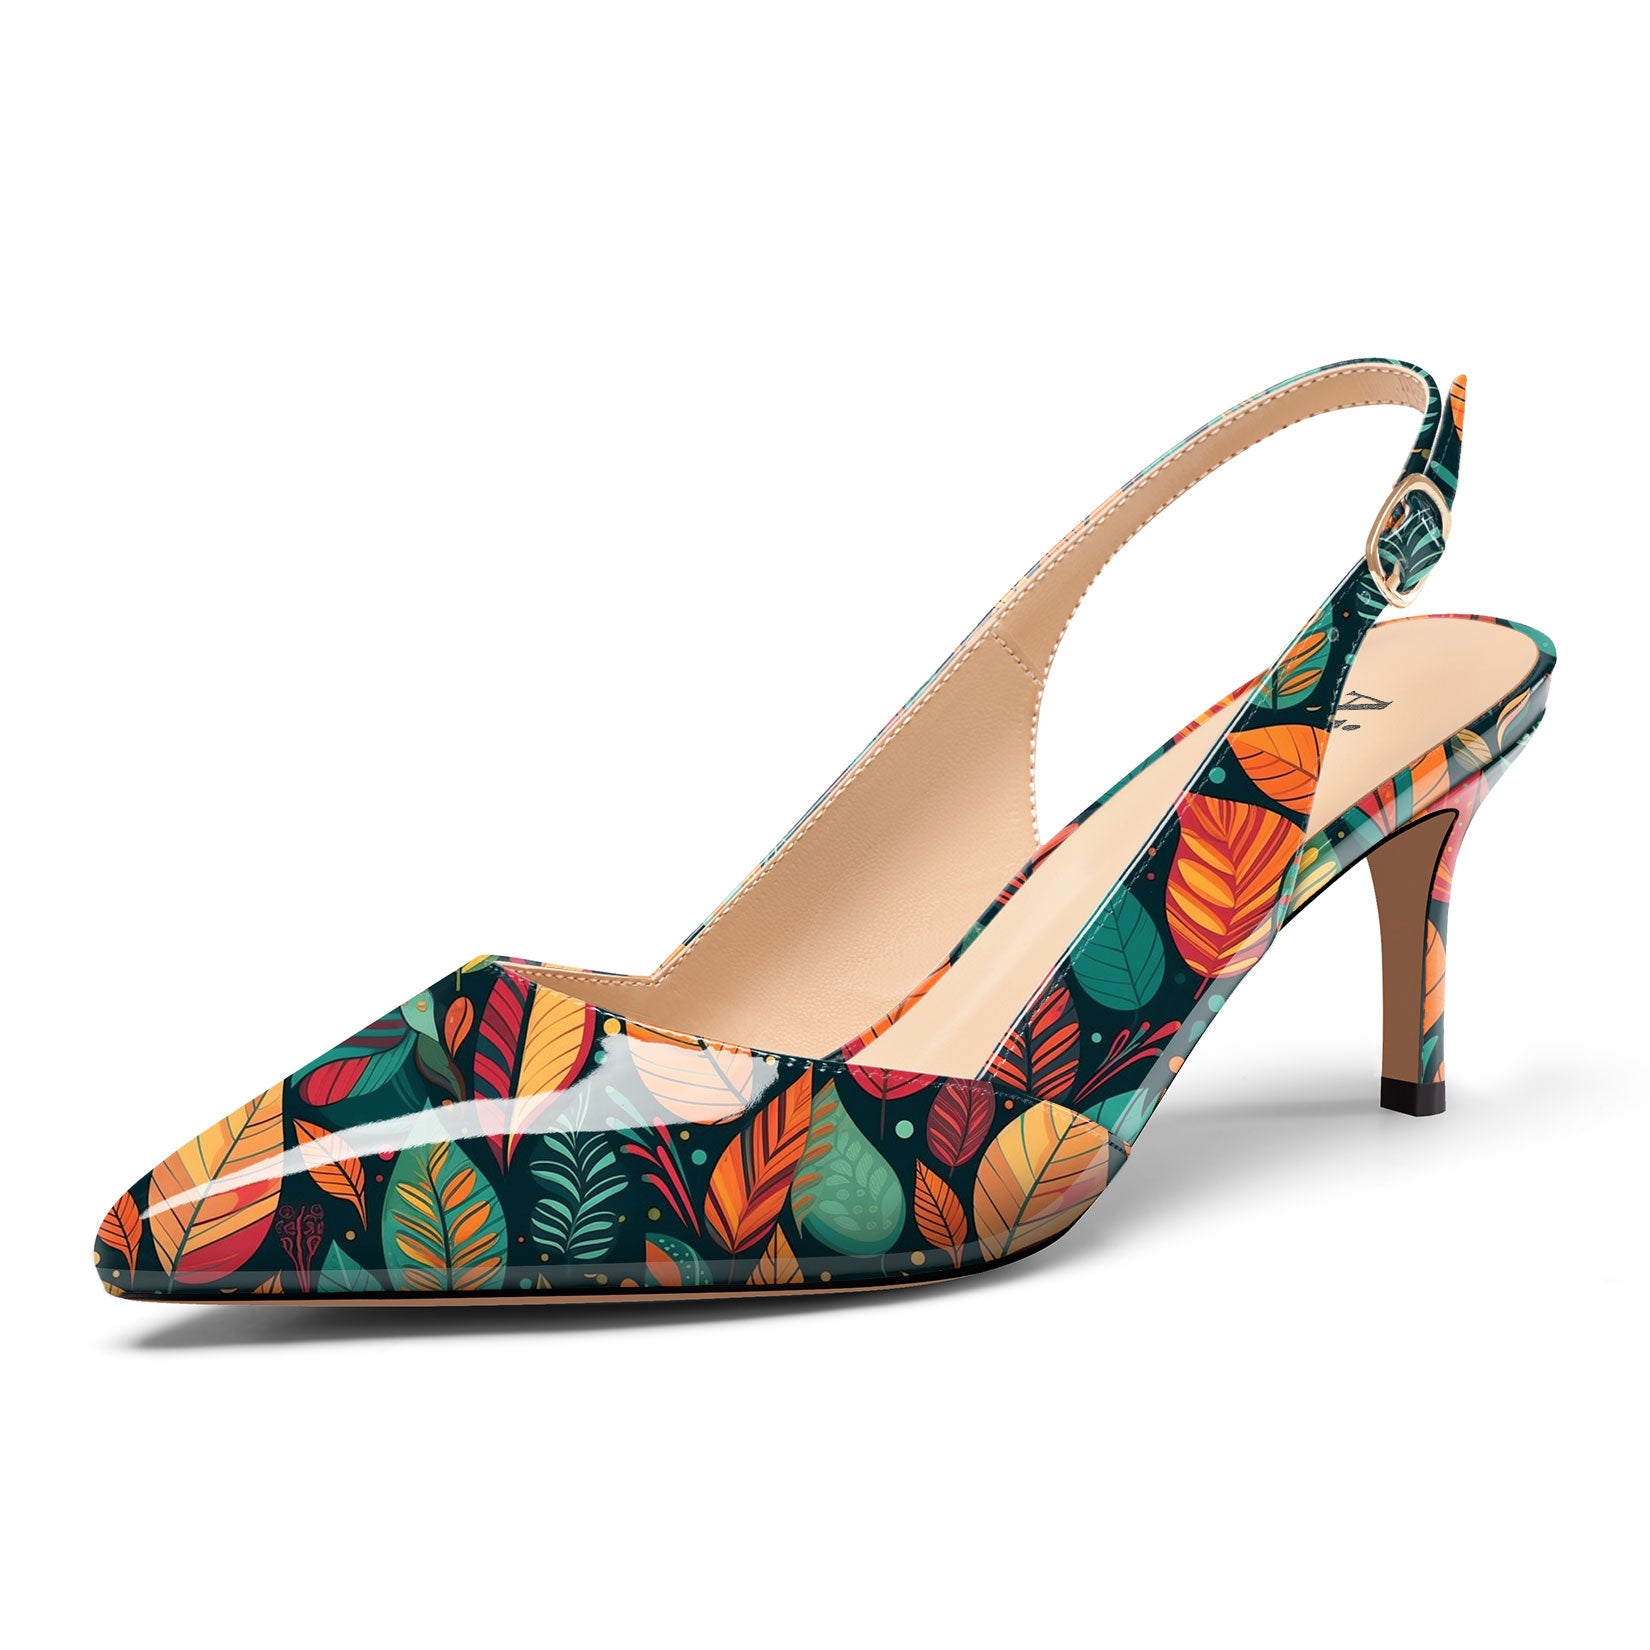 Ladies' Pointed Toe Slingback Pumps 2.3-Inch Heel, Alluringly Sleek with Patent Leather Finish, Colorful Prints Fashionably Versatile Shoes